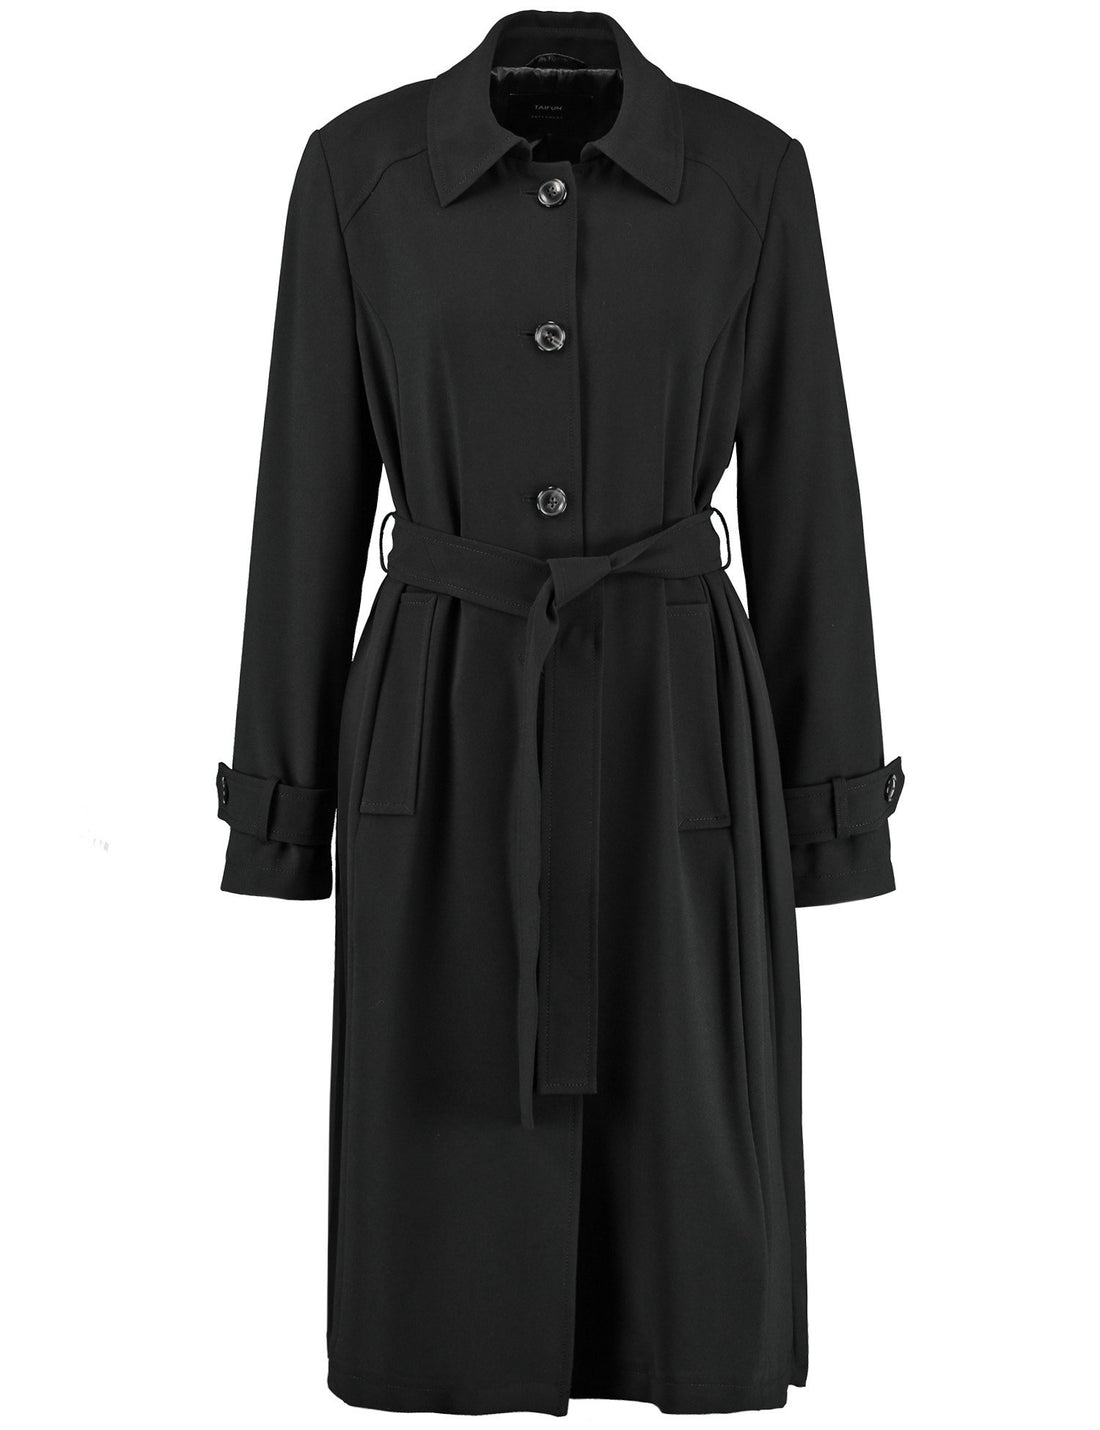 Trench Coat With A Pleated Back_550286-11509_1100_02